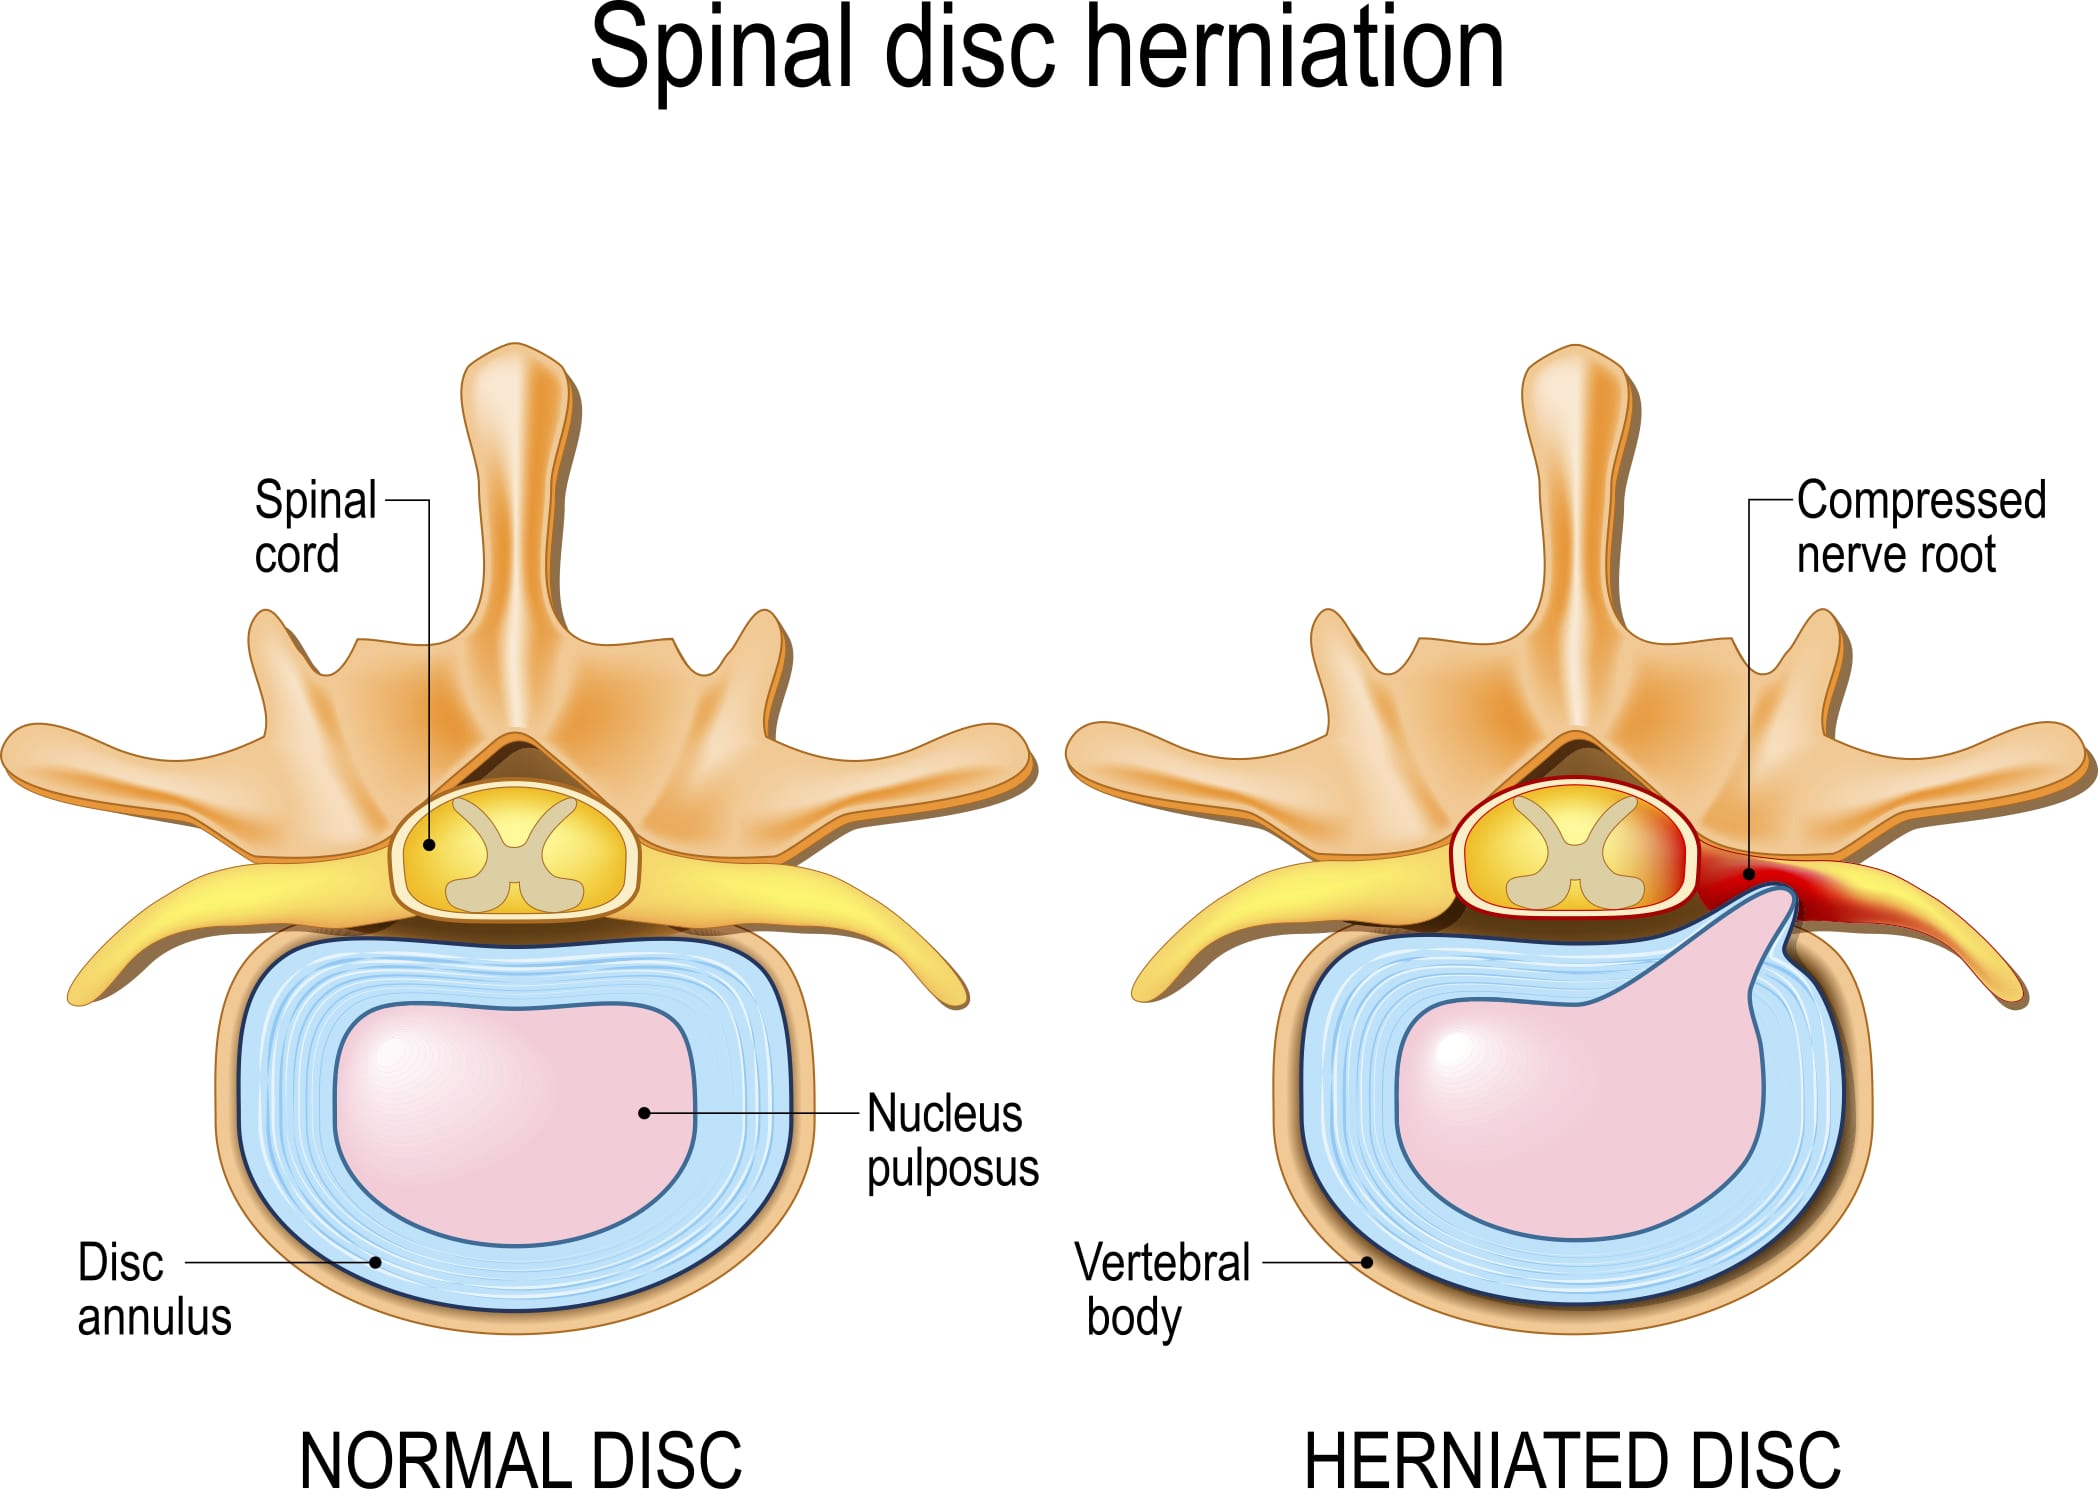 How to Prevent a Herniated Disc - Follow These Steps